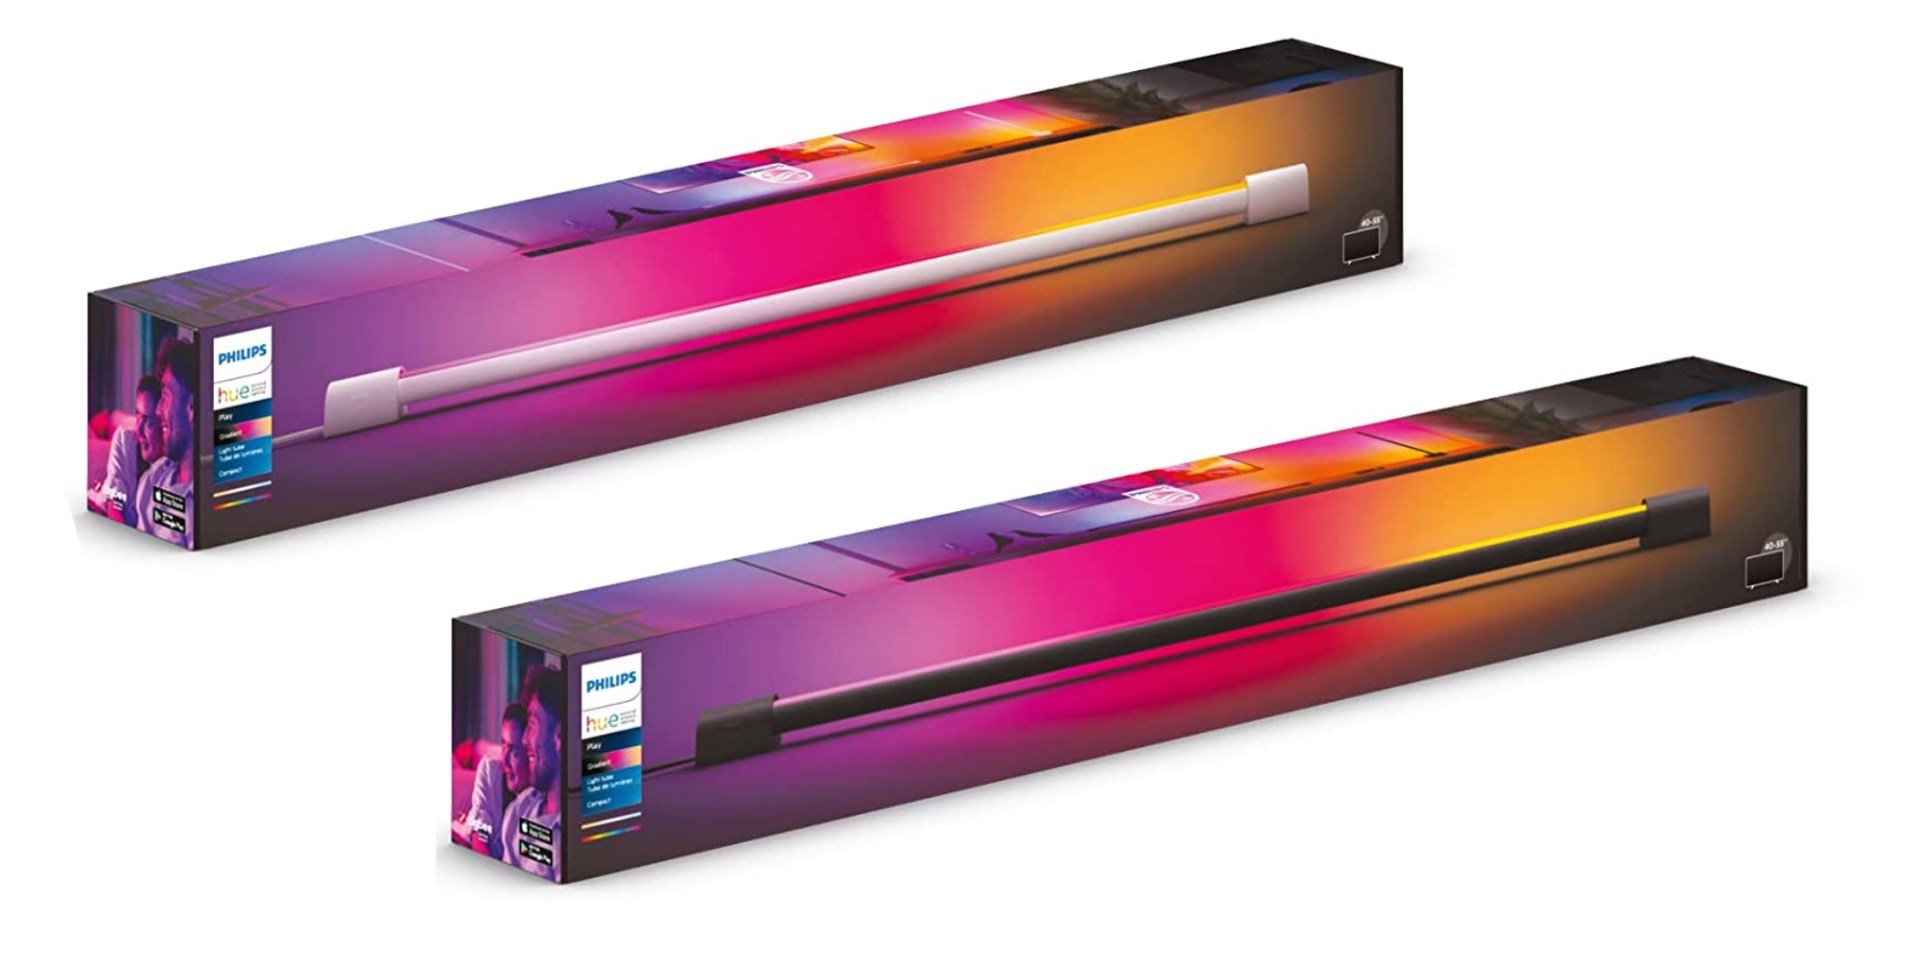 Philips Hue launches new Gradient Tube lamp with addressable RGB lighting